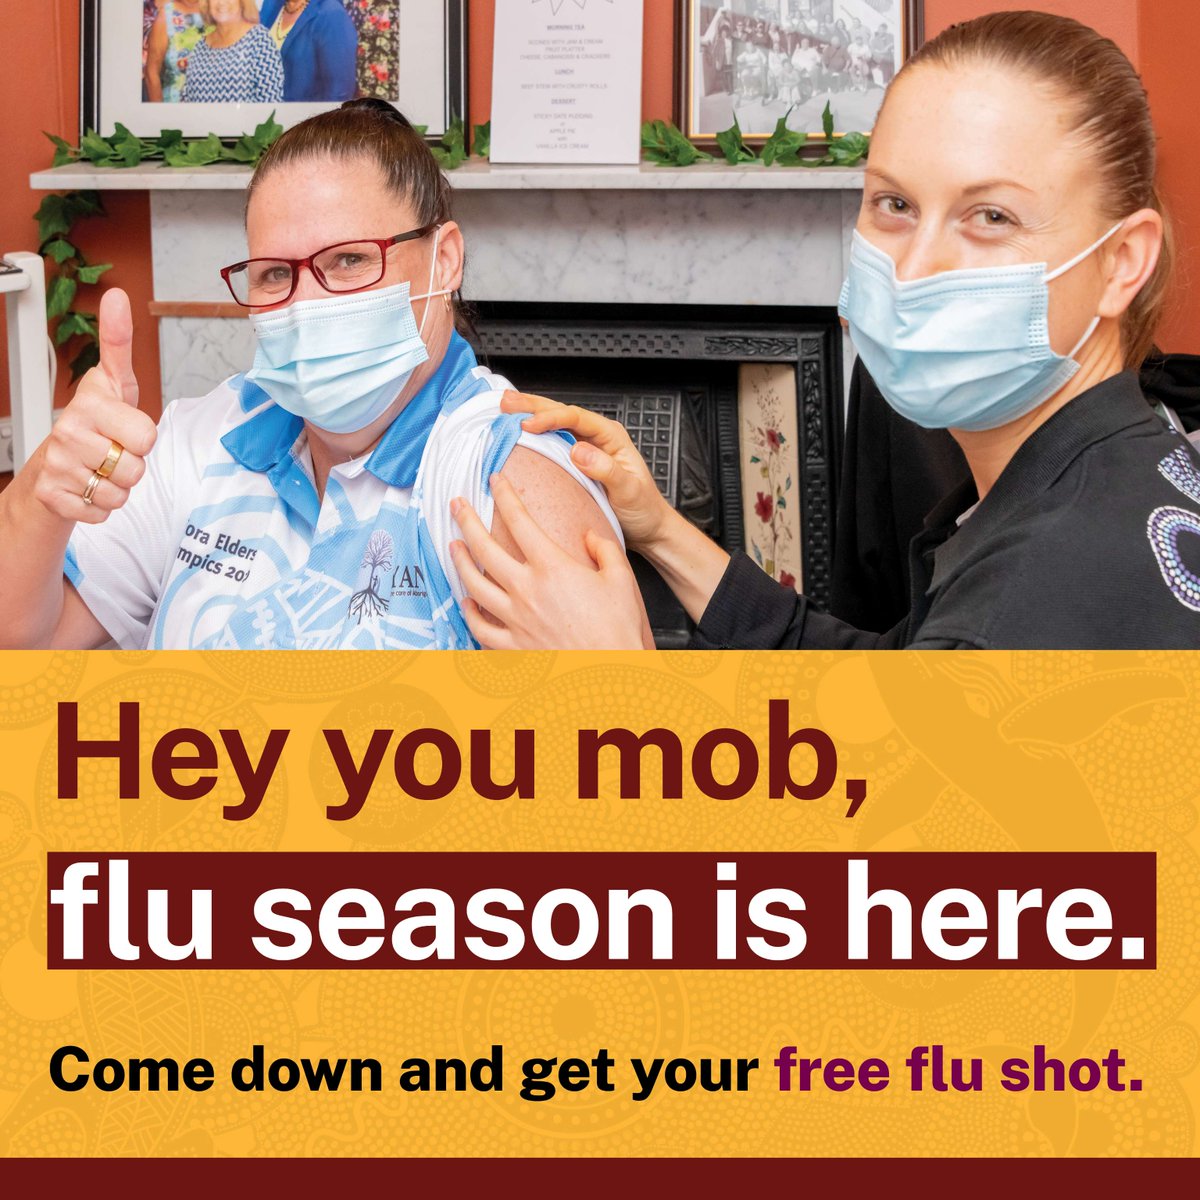 The flu vaccine is free for all Aboriginal people aged 6 months and older. Come along to get your free flu vaccination on Friday 3 May at Redfern Health Centre from 10am-6pm.